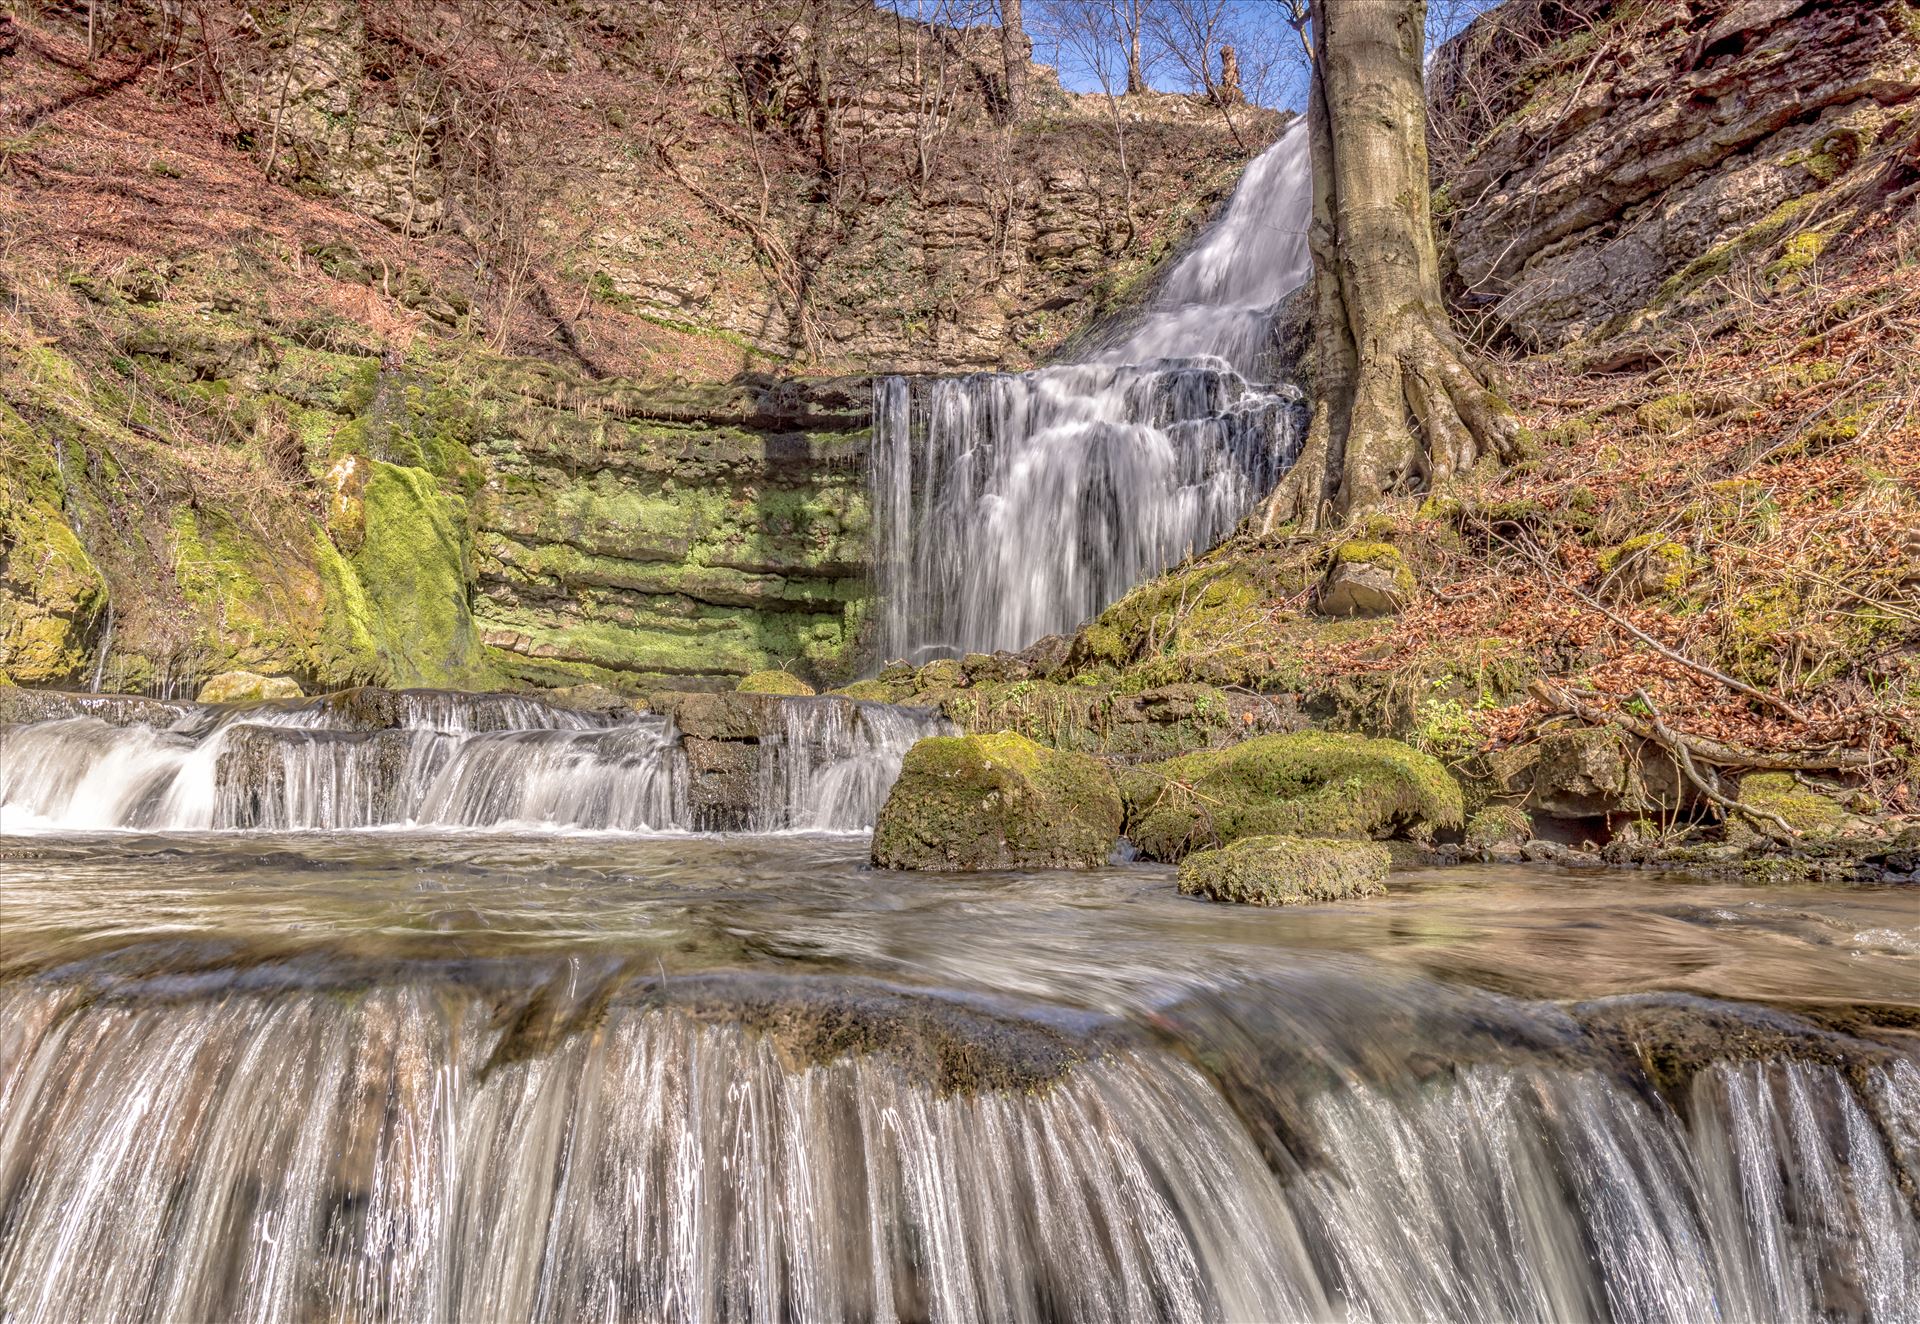 Scaleber Force - Scaleber Force,a stunning 40ft waterfall, is in a lovely location a mile or so above Settle in Ribblesdale on the road to Kirkby Malham in the Yorkshire Dales. by philreay